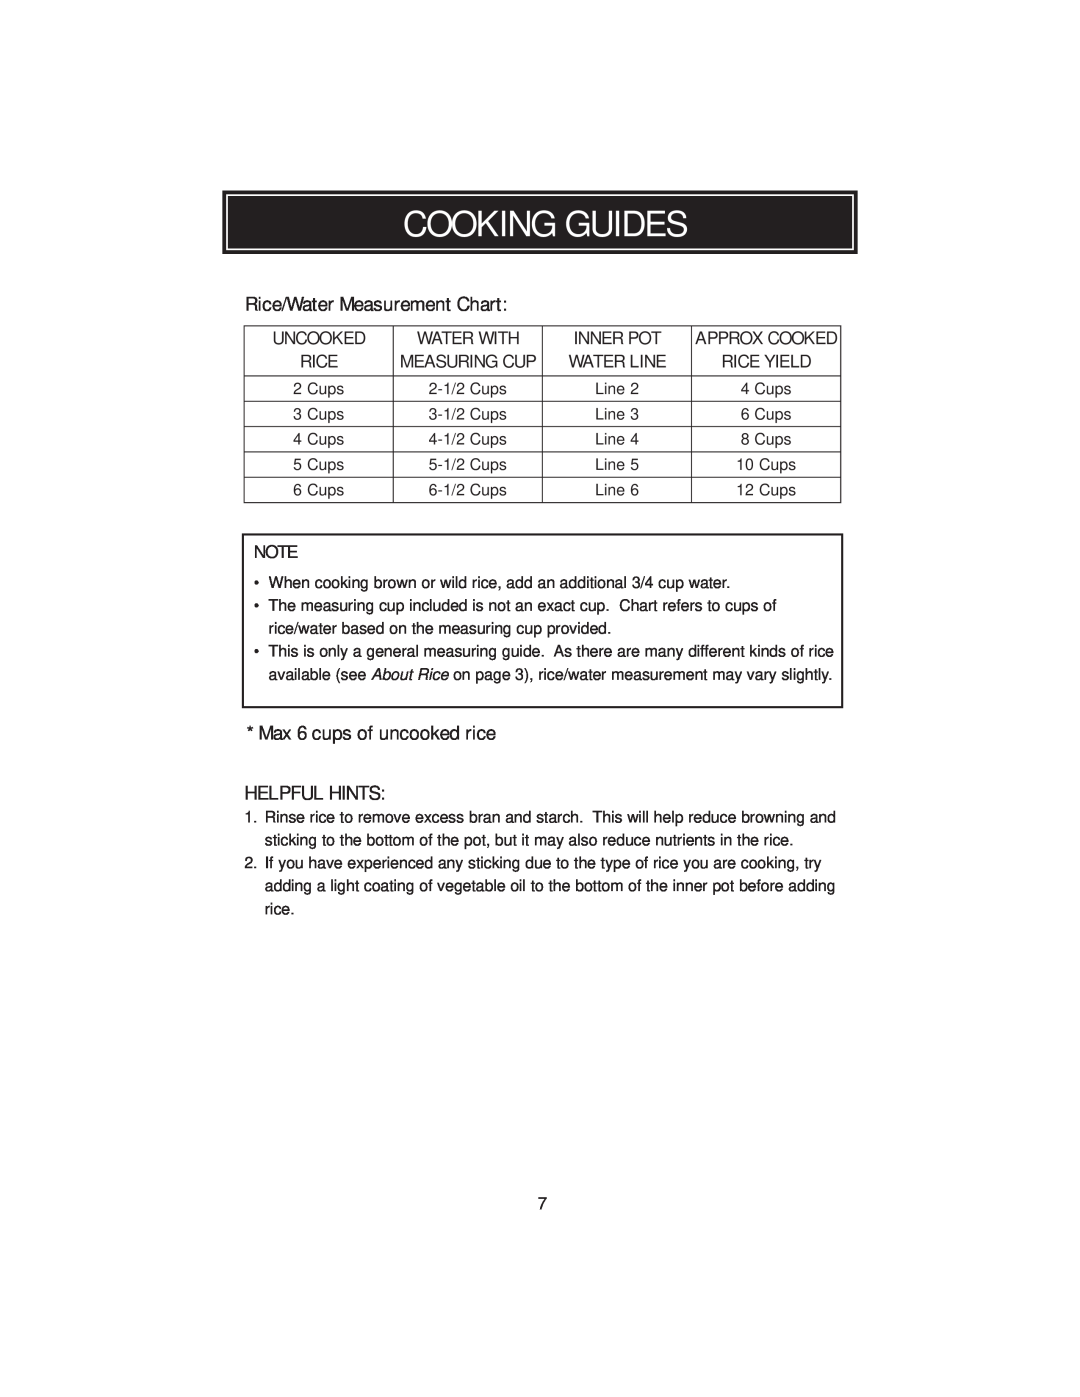 Aroma ARC3946 Cooking Guides, Rice/Water Measurement Chart, Max 6 cups of uncooked rice HELPFUL HINTS, Uncooked, Inner Pot 